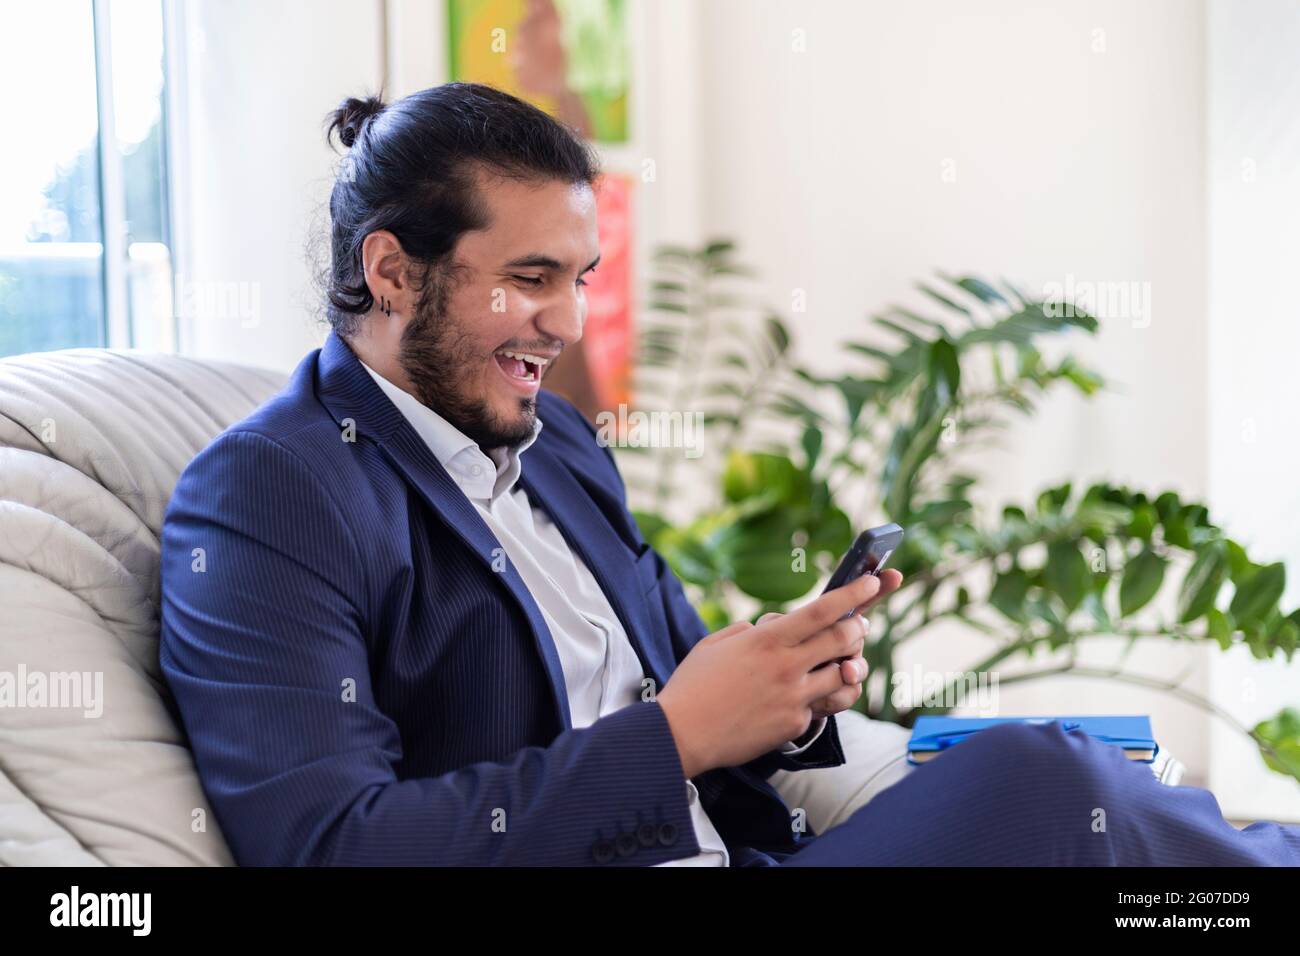 young latino man with long hair and piercings dressed in suit smiling while texting on smart phone in home office. Home Office concept Stock Photo